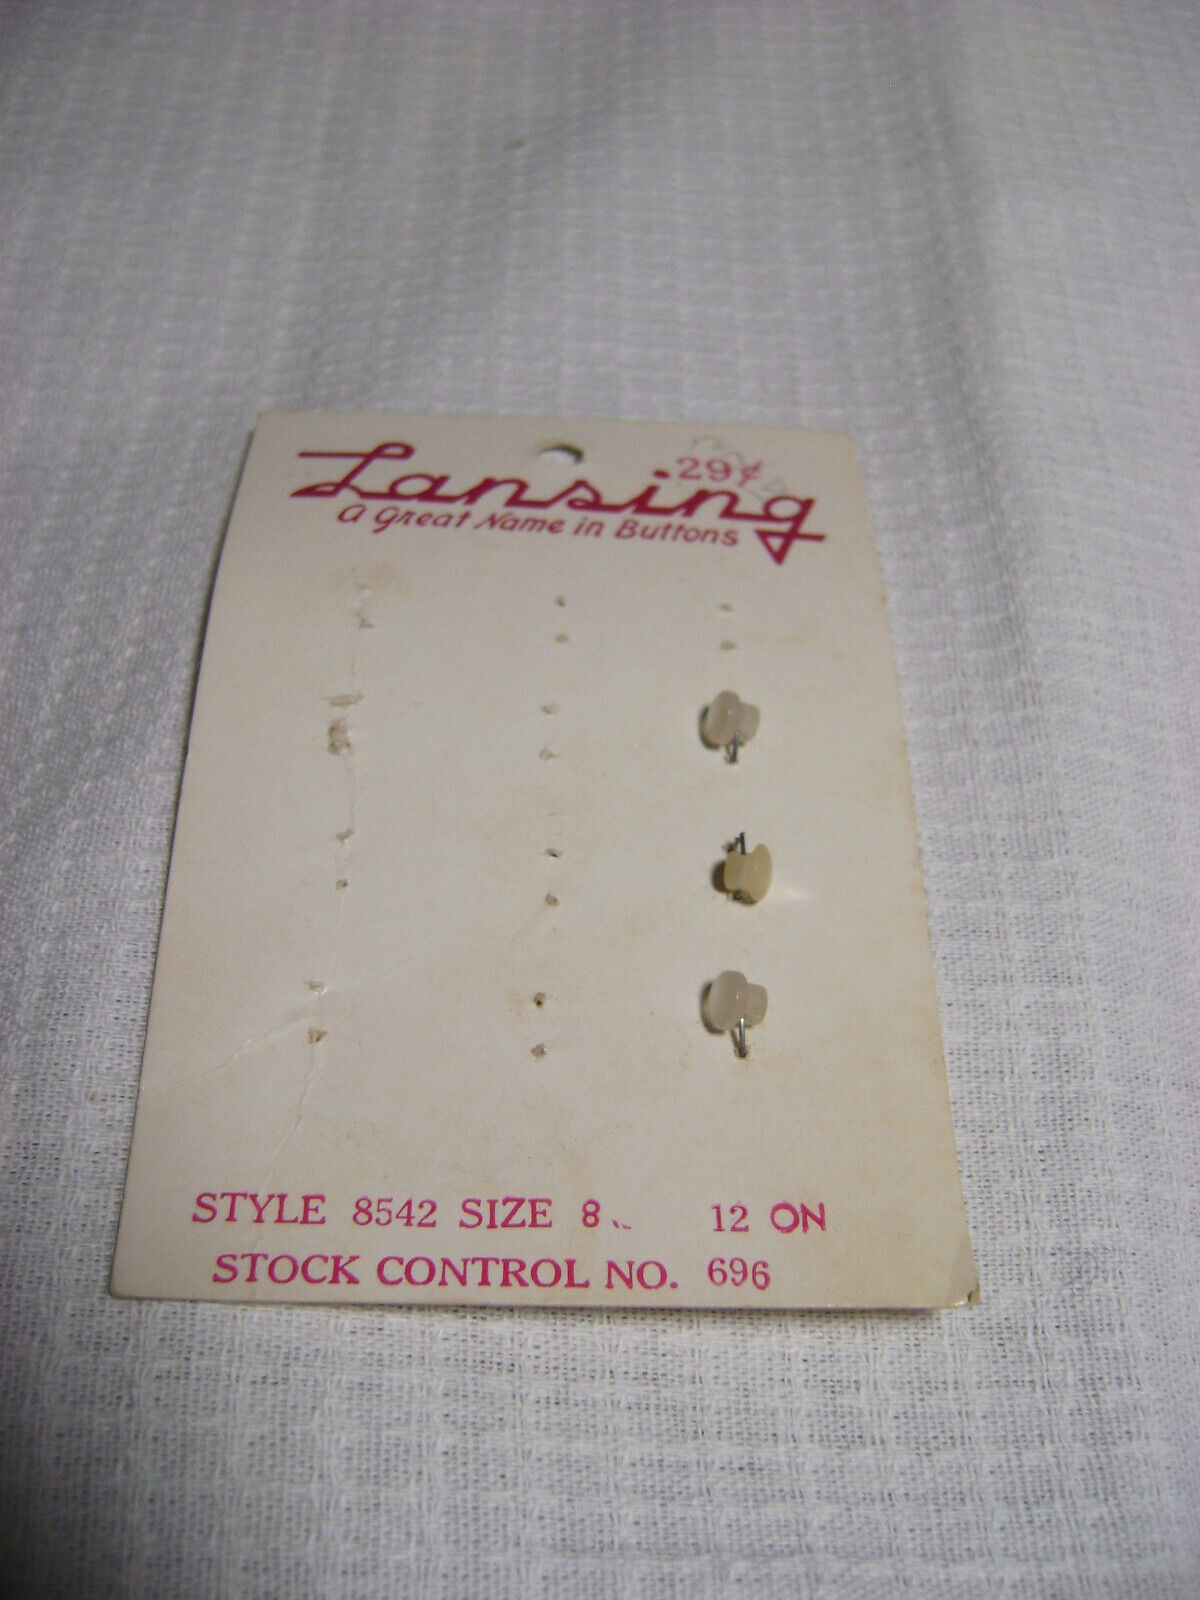 Card of 3 Extremely Tiny Diminutive Buttons Vintage Shank